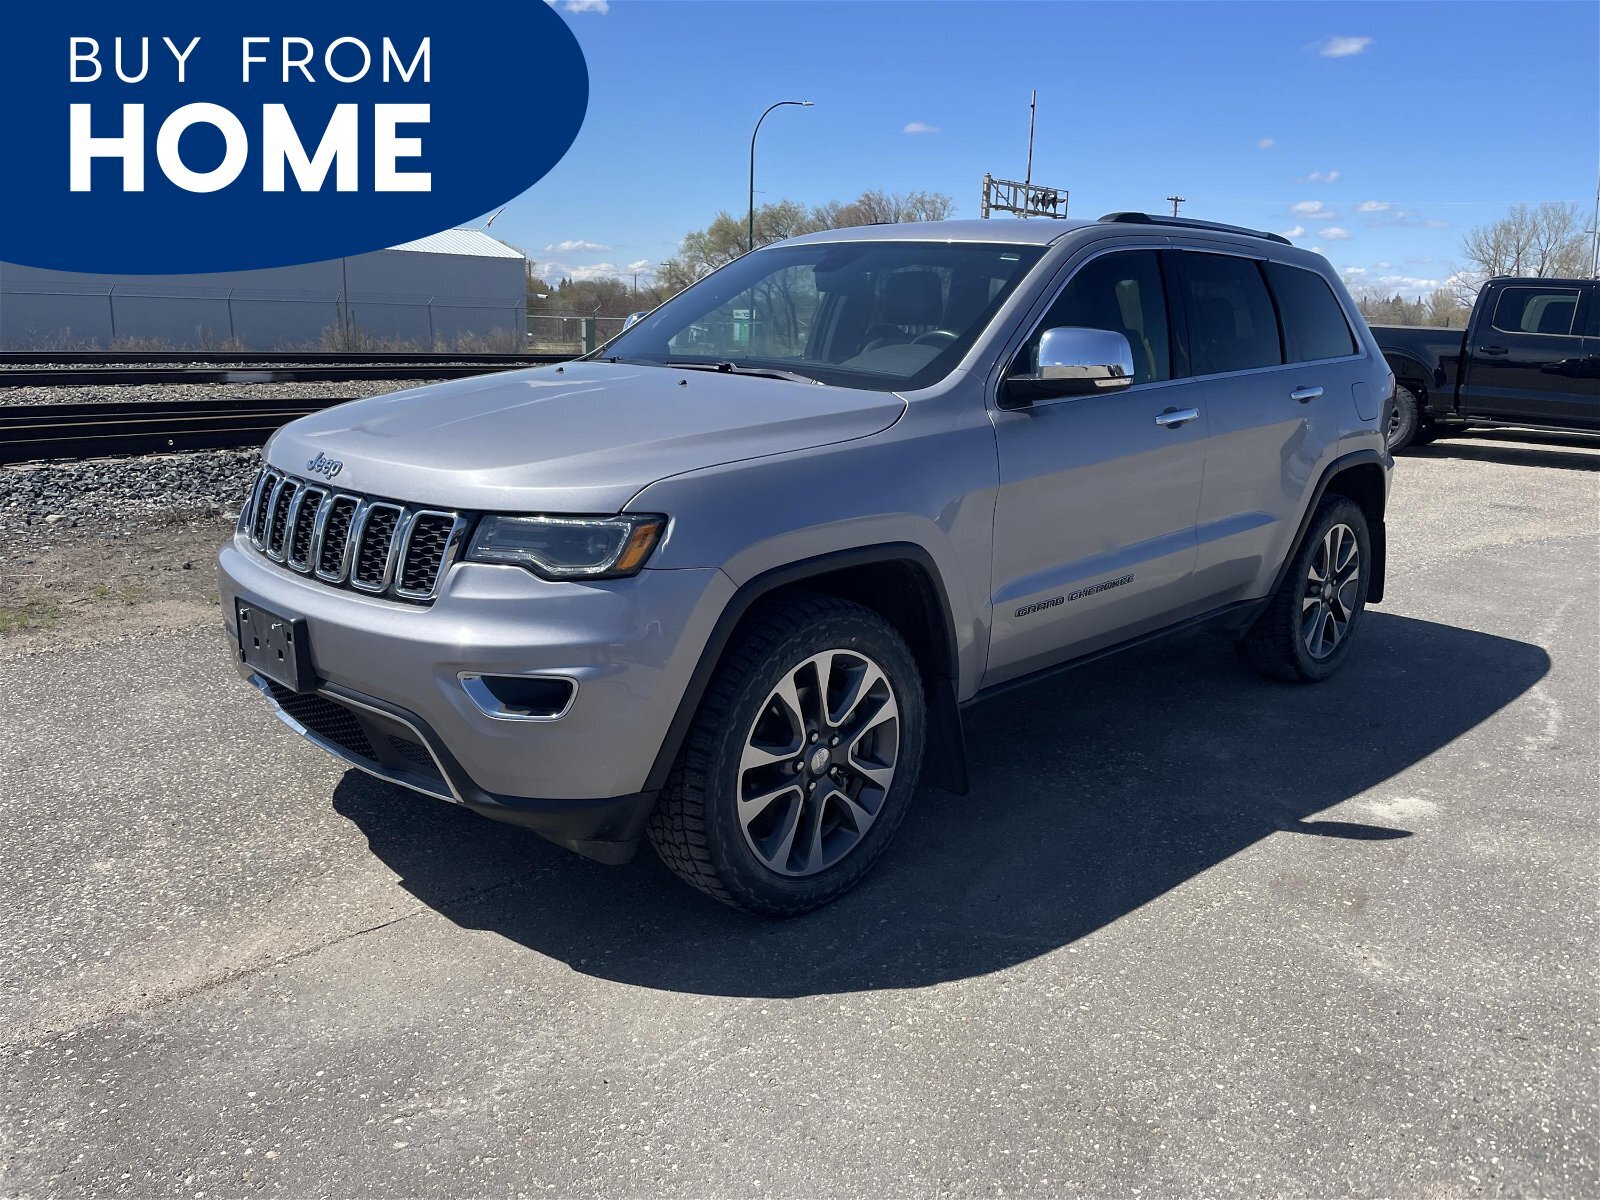 2018 Jeep Grand Cherokee Limited Limited